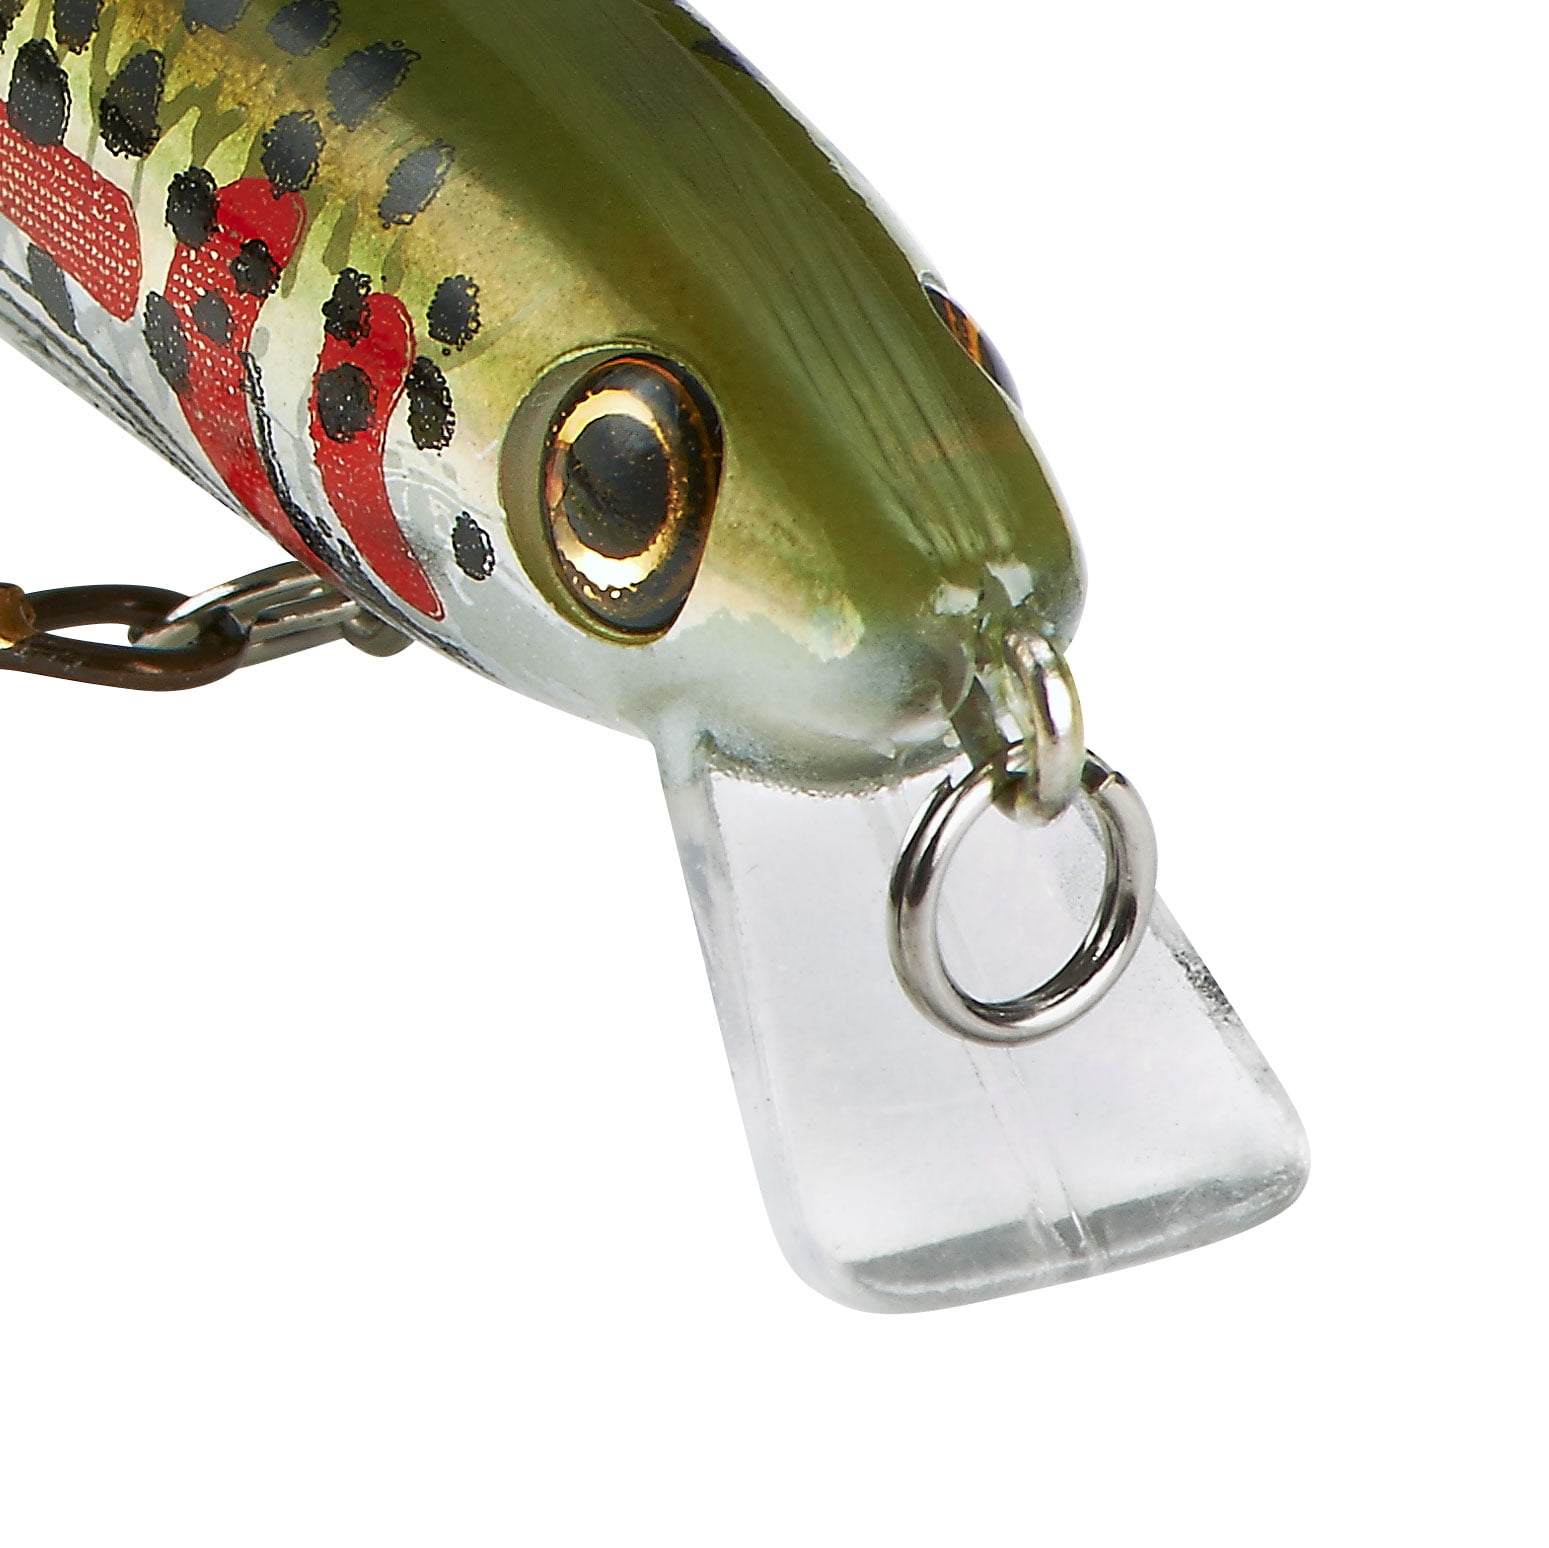 trifyd ® - Minnow Trout Swimming Fish, 7 cm, Pack of 5 Fishing Lures :  : Sports & Outdoors